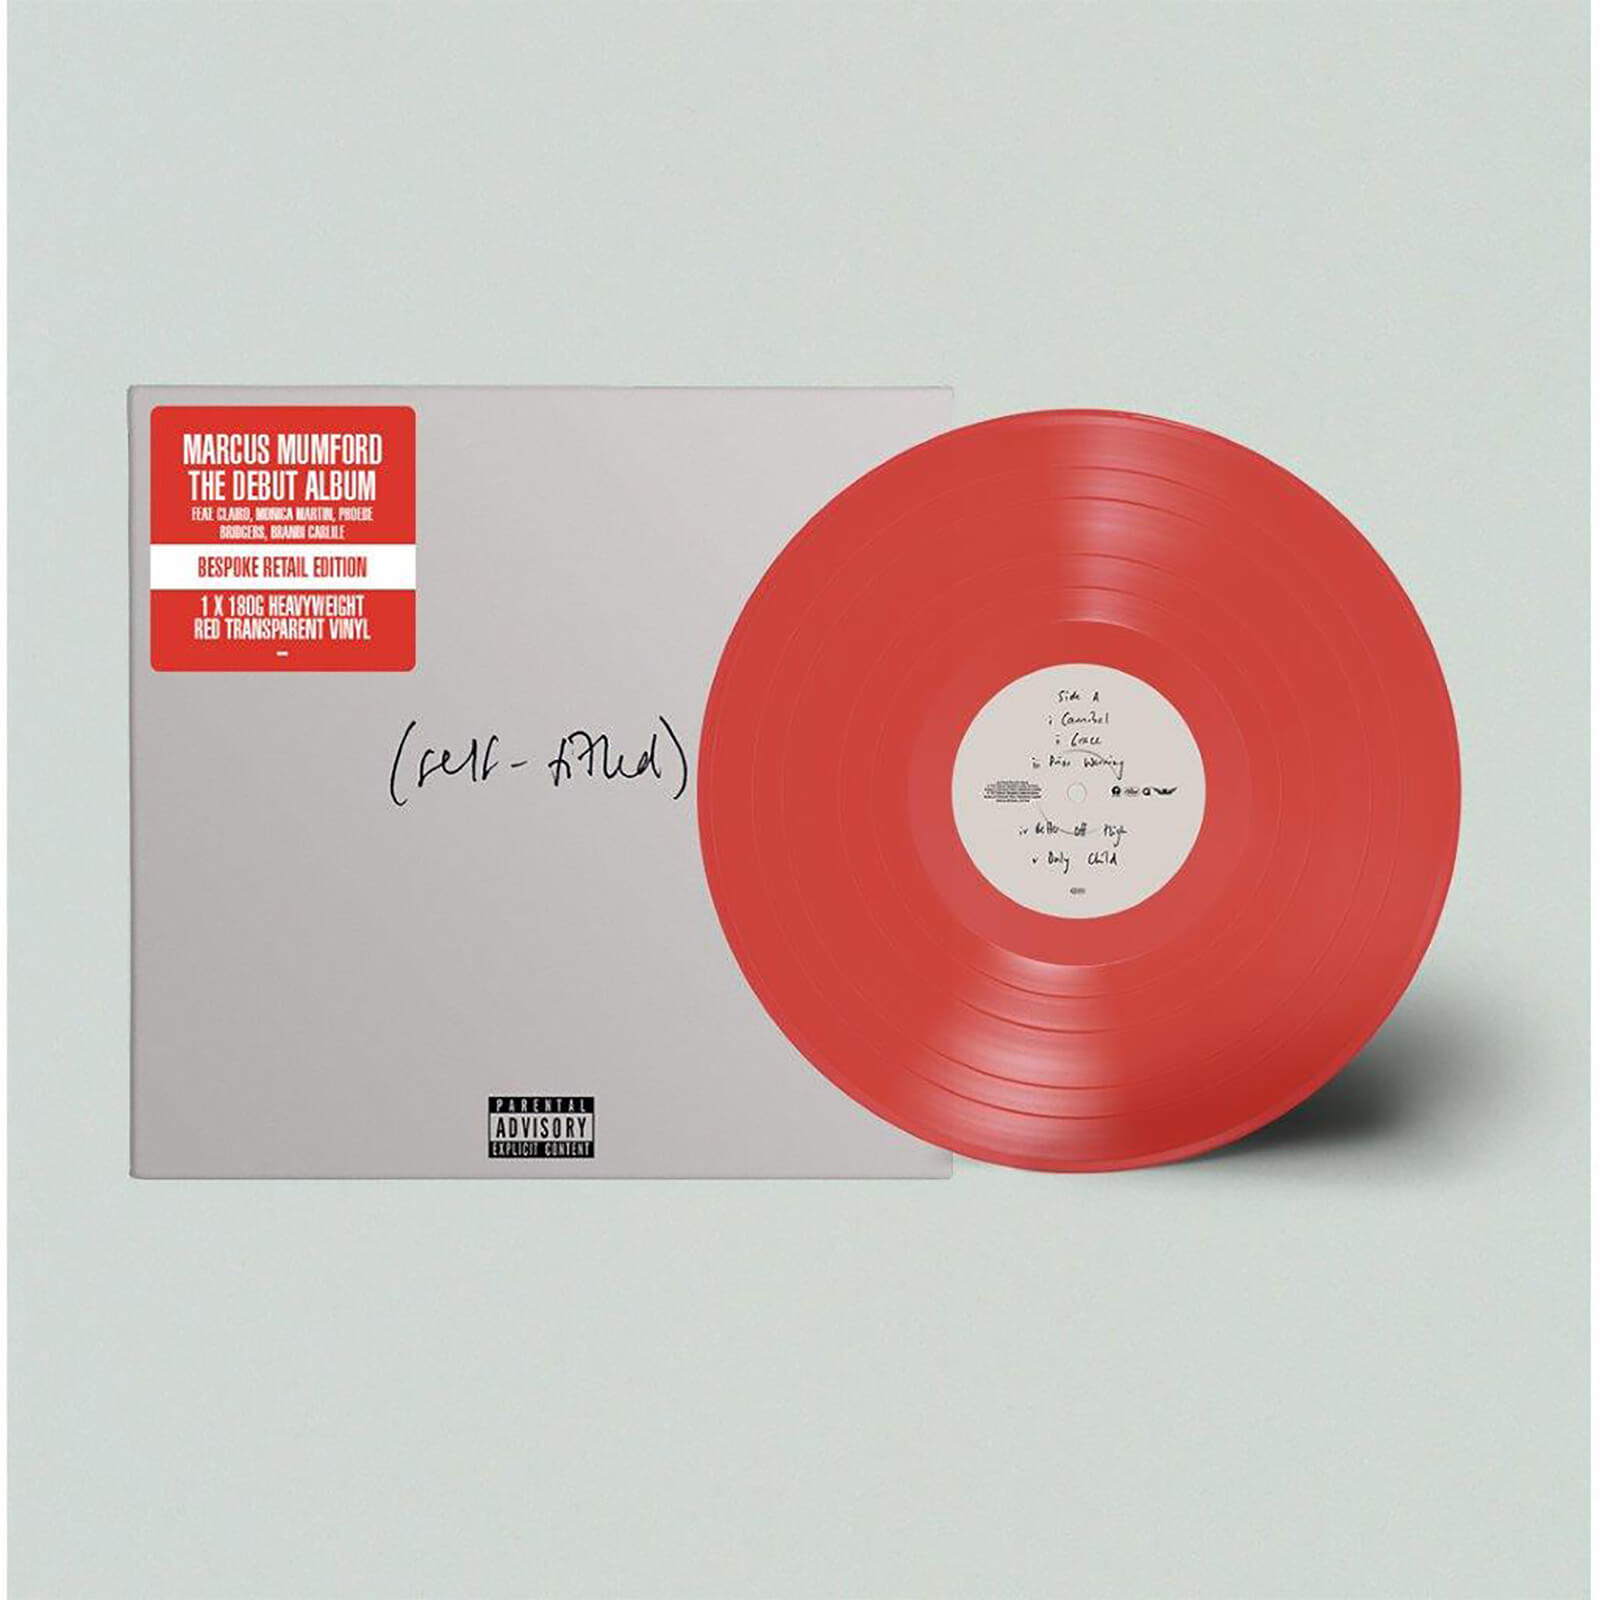 Marcus Mumford - (self-titled) Limited Edition Red Vinyl